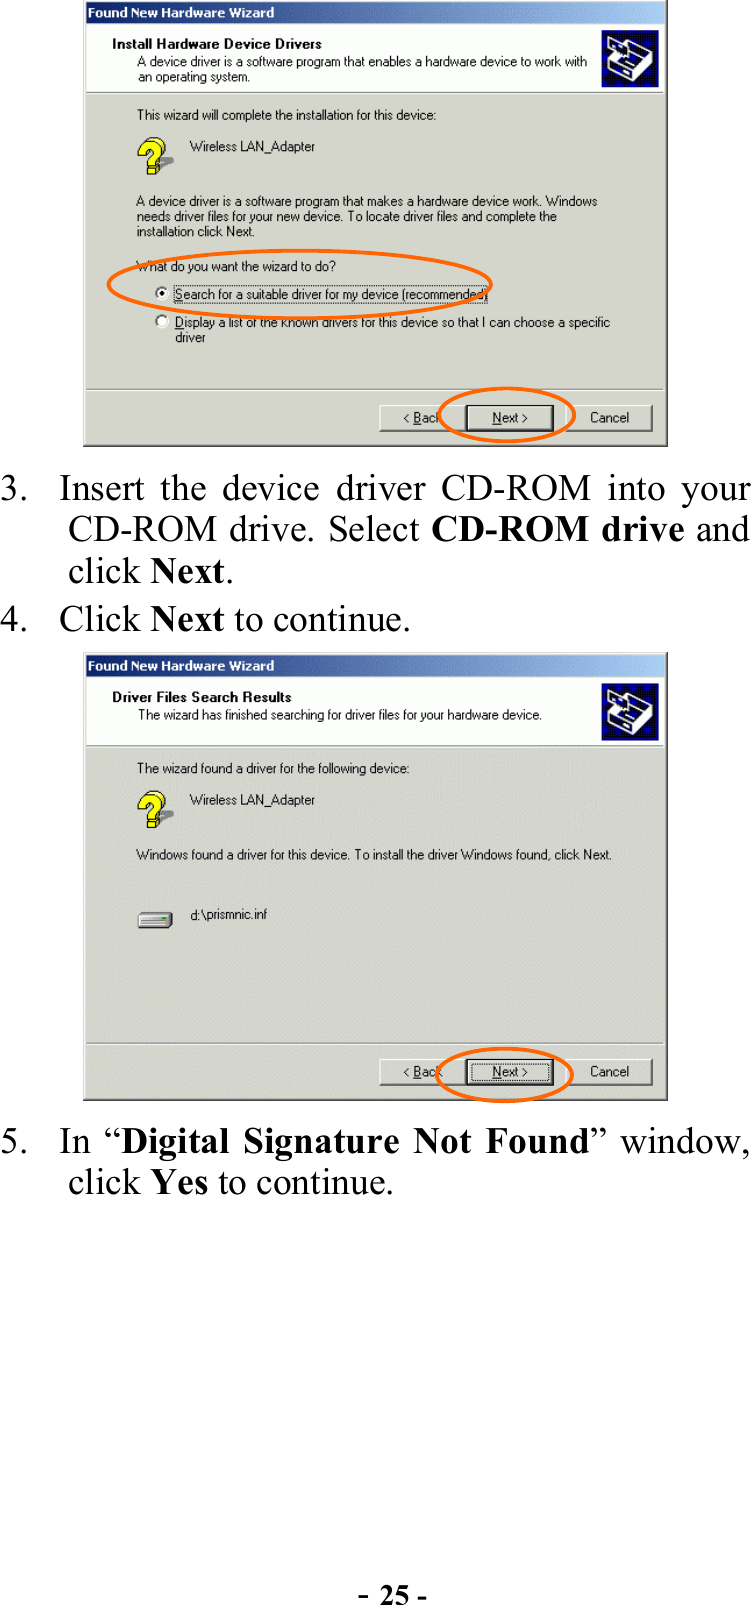  - 25 -  3.  Insert the device driver CD-ROM into your CD-ROM drive. Select CD-ROM drive and click Next. 4. Click Next to continue.  5. In “Digital Signature Not Found” window, click Yes to continue. 